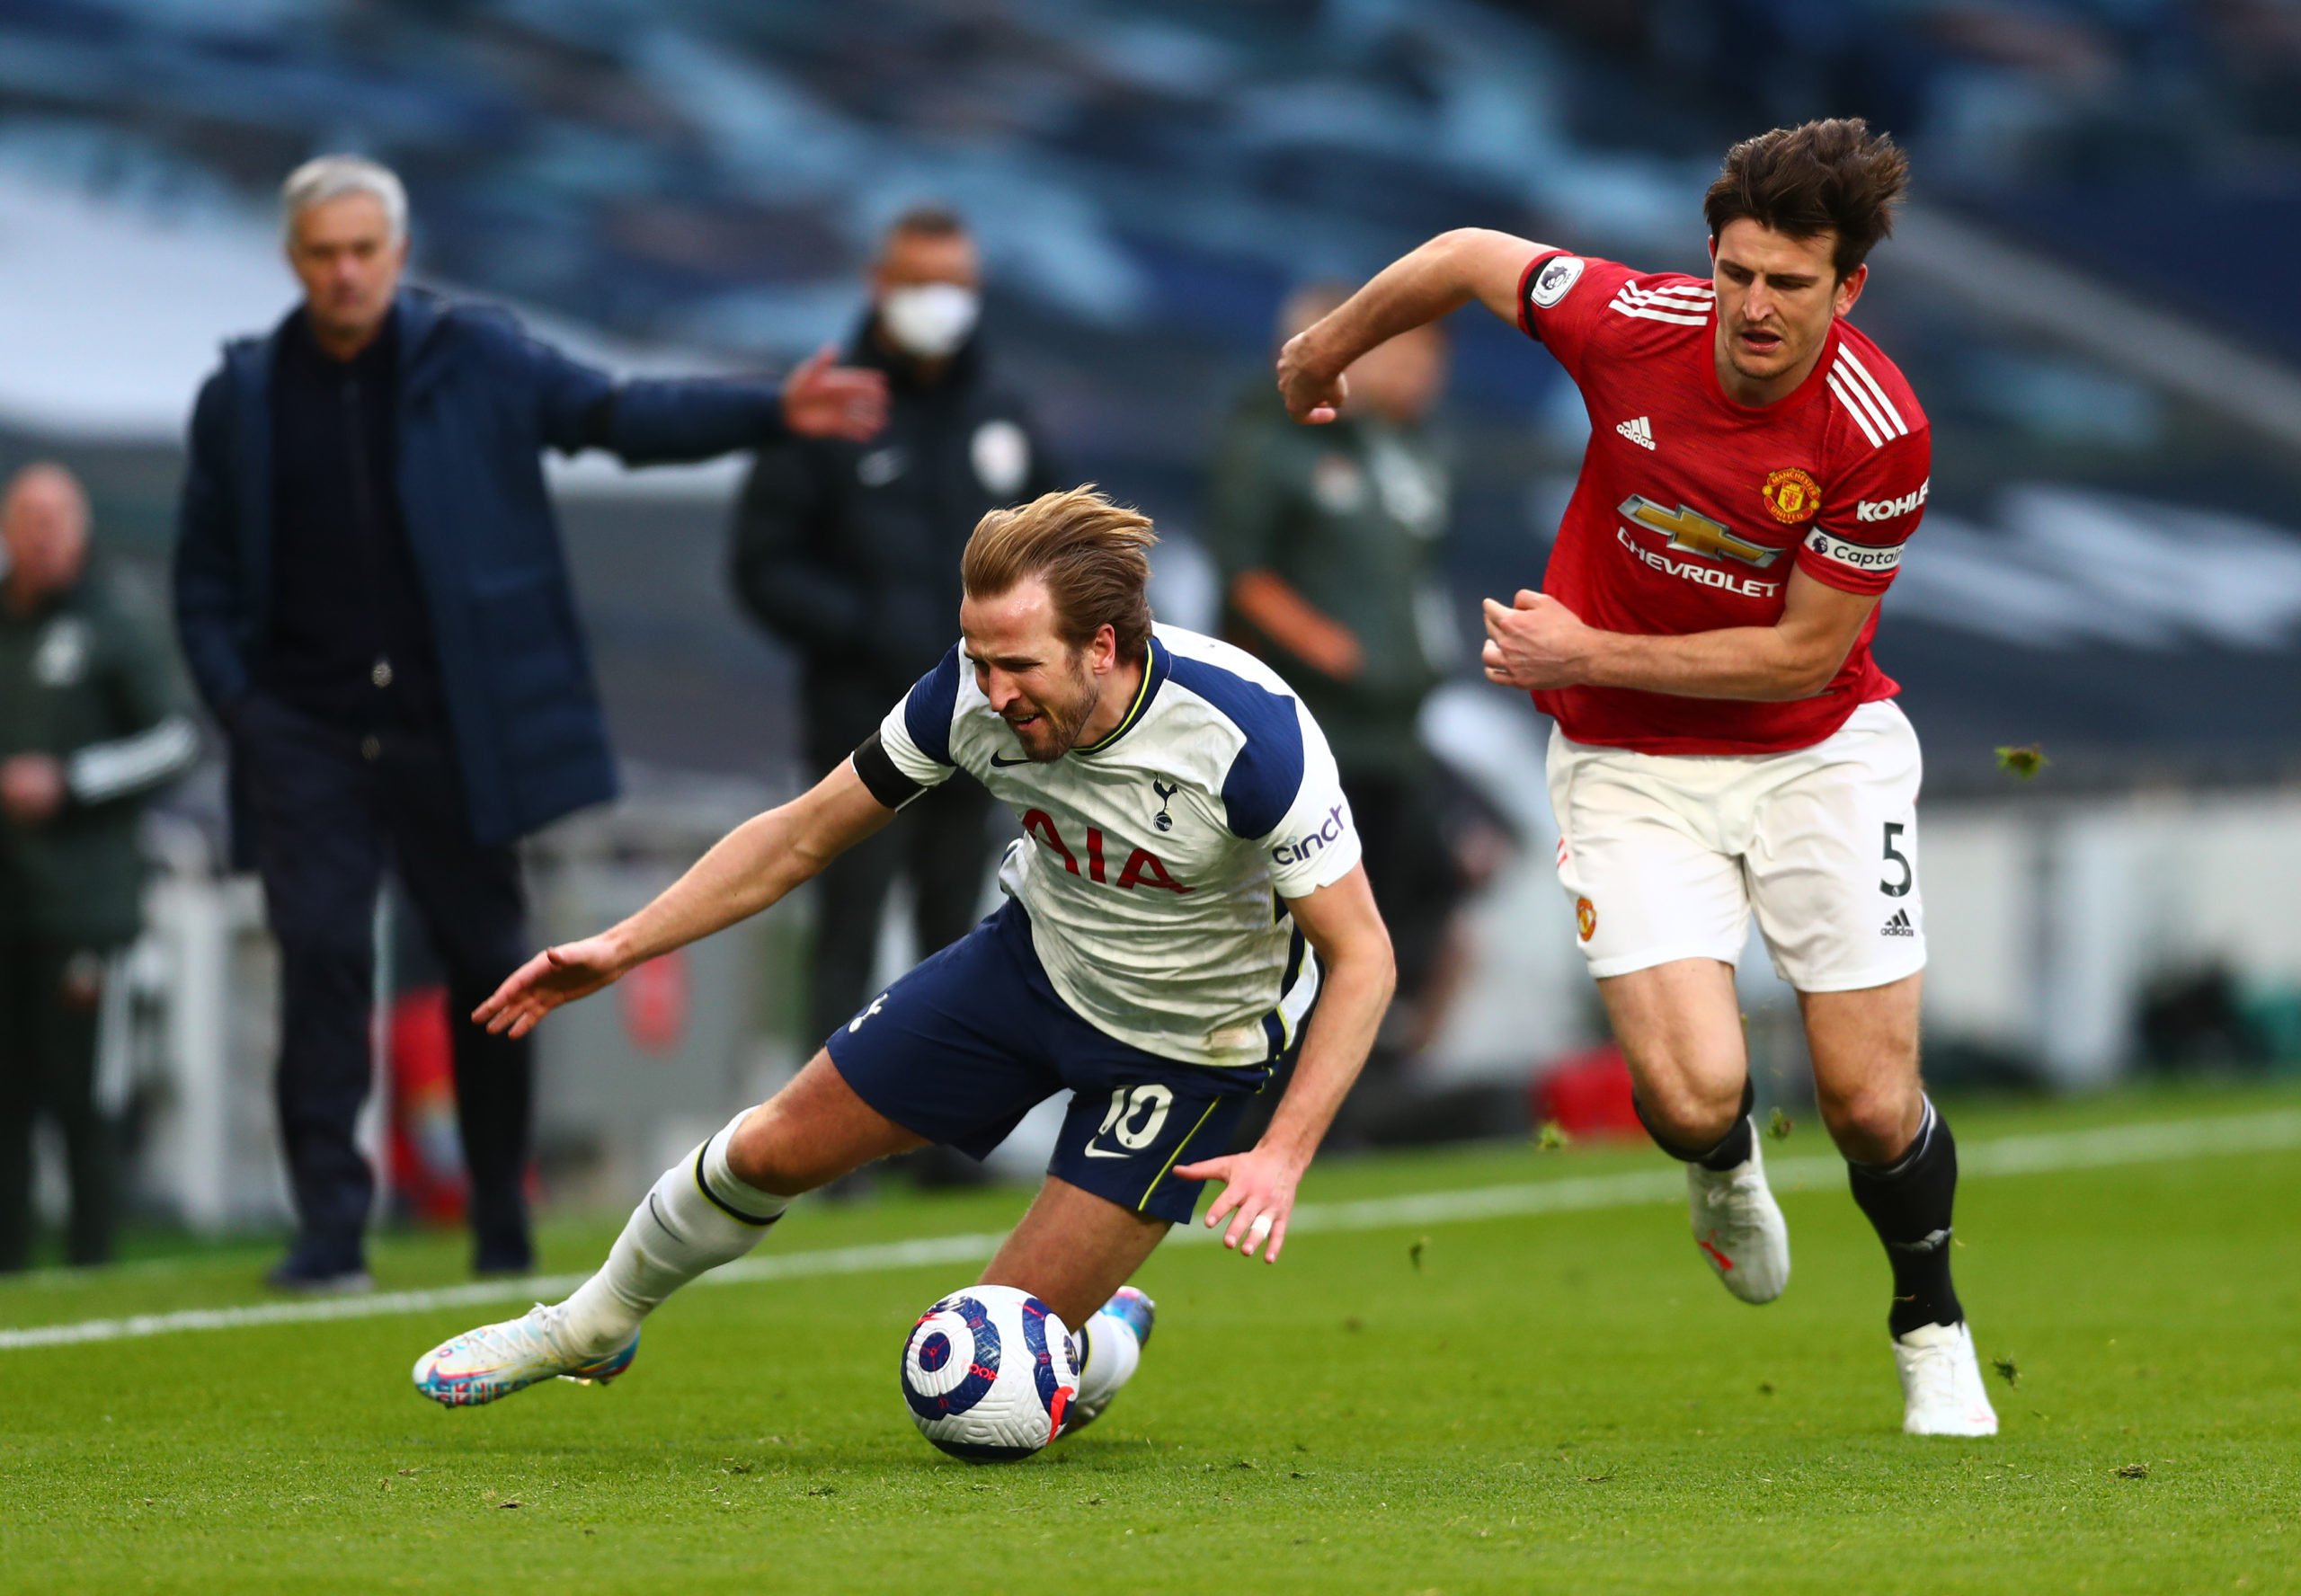 LONDON, ENGLAND - APRIL 11: Harry Kane of Tottenham Hotspur battles for possession with Harry Maguire of Manchester United during the Premier League match between Tottenham Hotspur and Manchester United at Tottenham Hotspur Stadium on April 11, 2021 in London, England. Sporting stadiums around the UK remain under strict restrictions due to the Coronavirus Pandemic as Government social distancing laws prohibit fans inside venues resulting in games being played behind closed doors. (Photo by Clive Rose/Getty Images)
The 4th Official uses images provided by the following image agency: Getty Images (https://www.gettyimages.de/)
Imago Images (https://www.imago-images.de/)